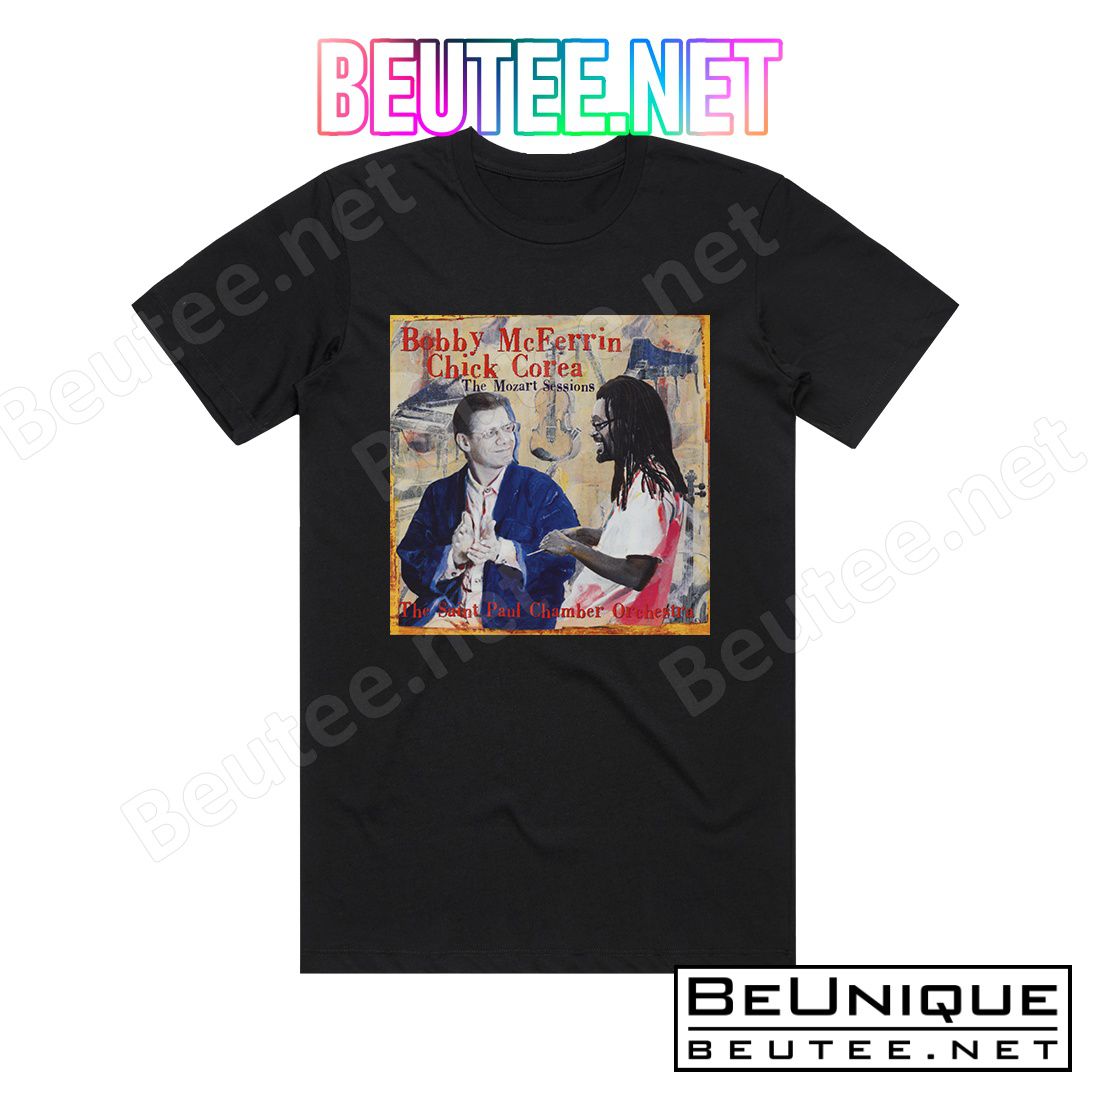 Bobby McFerrin The Mozart Sessions Album Cover T-Shirt